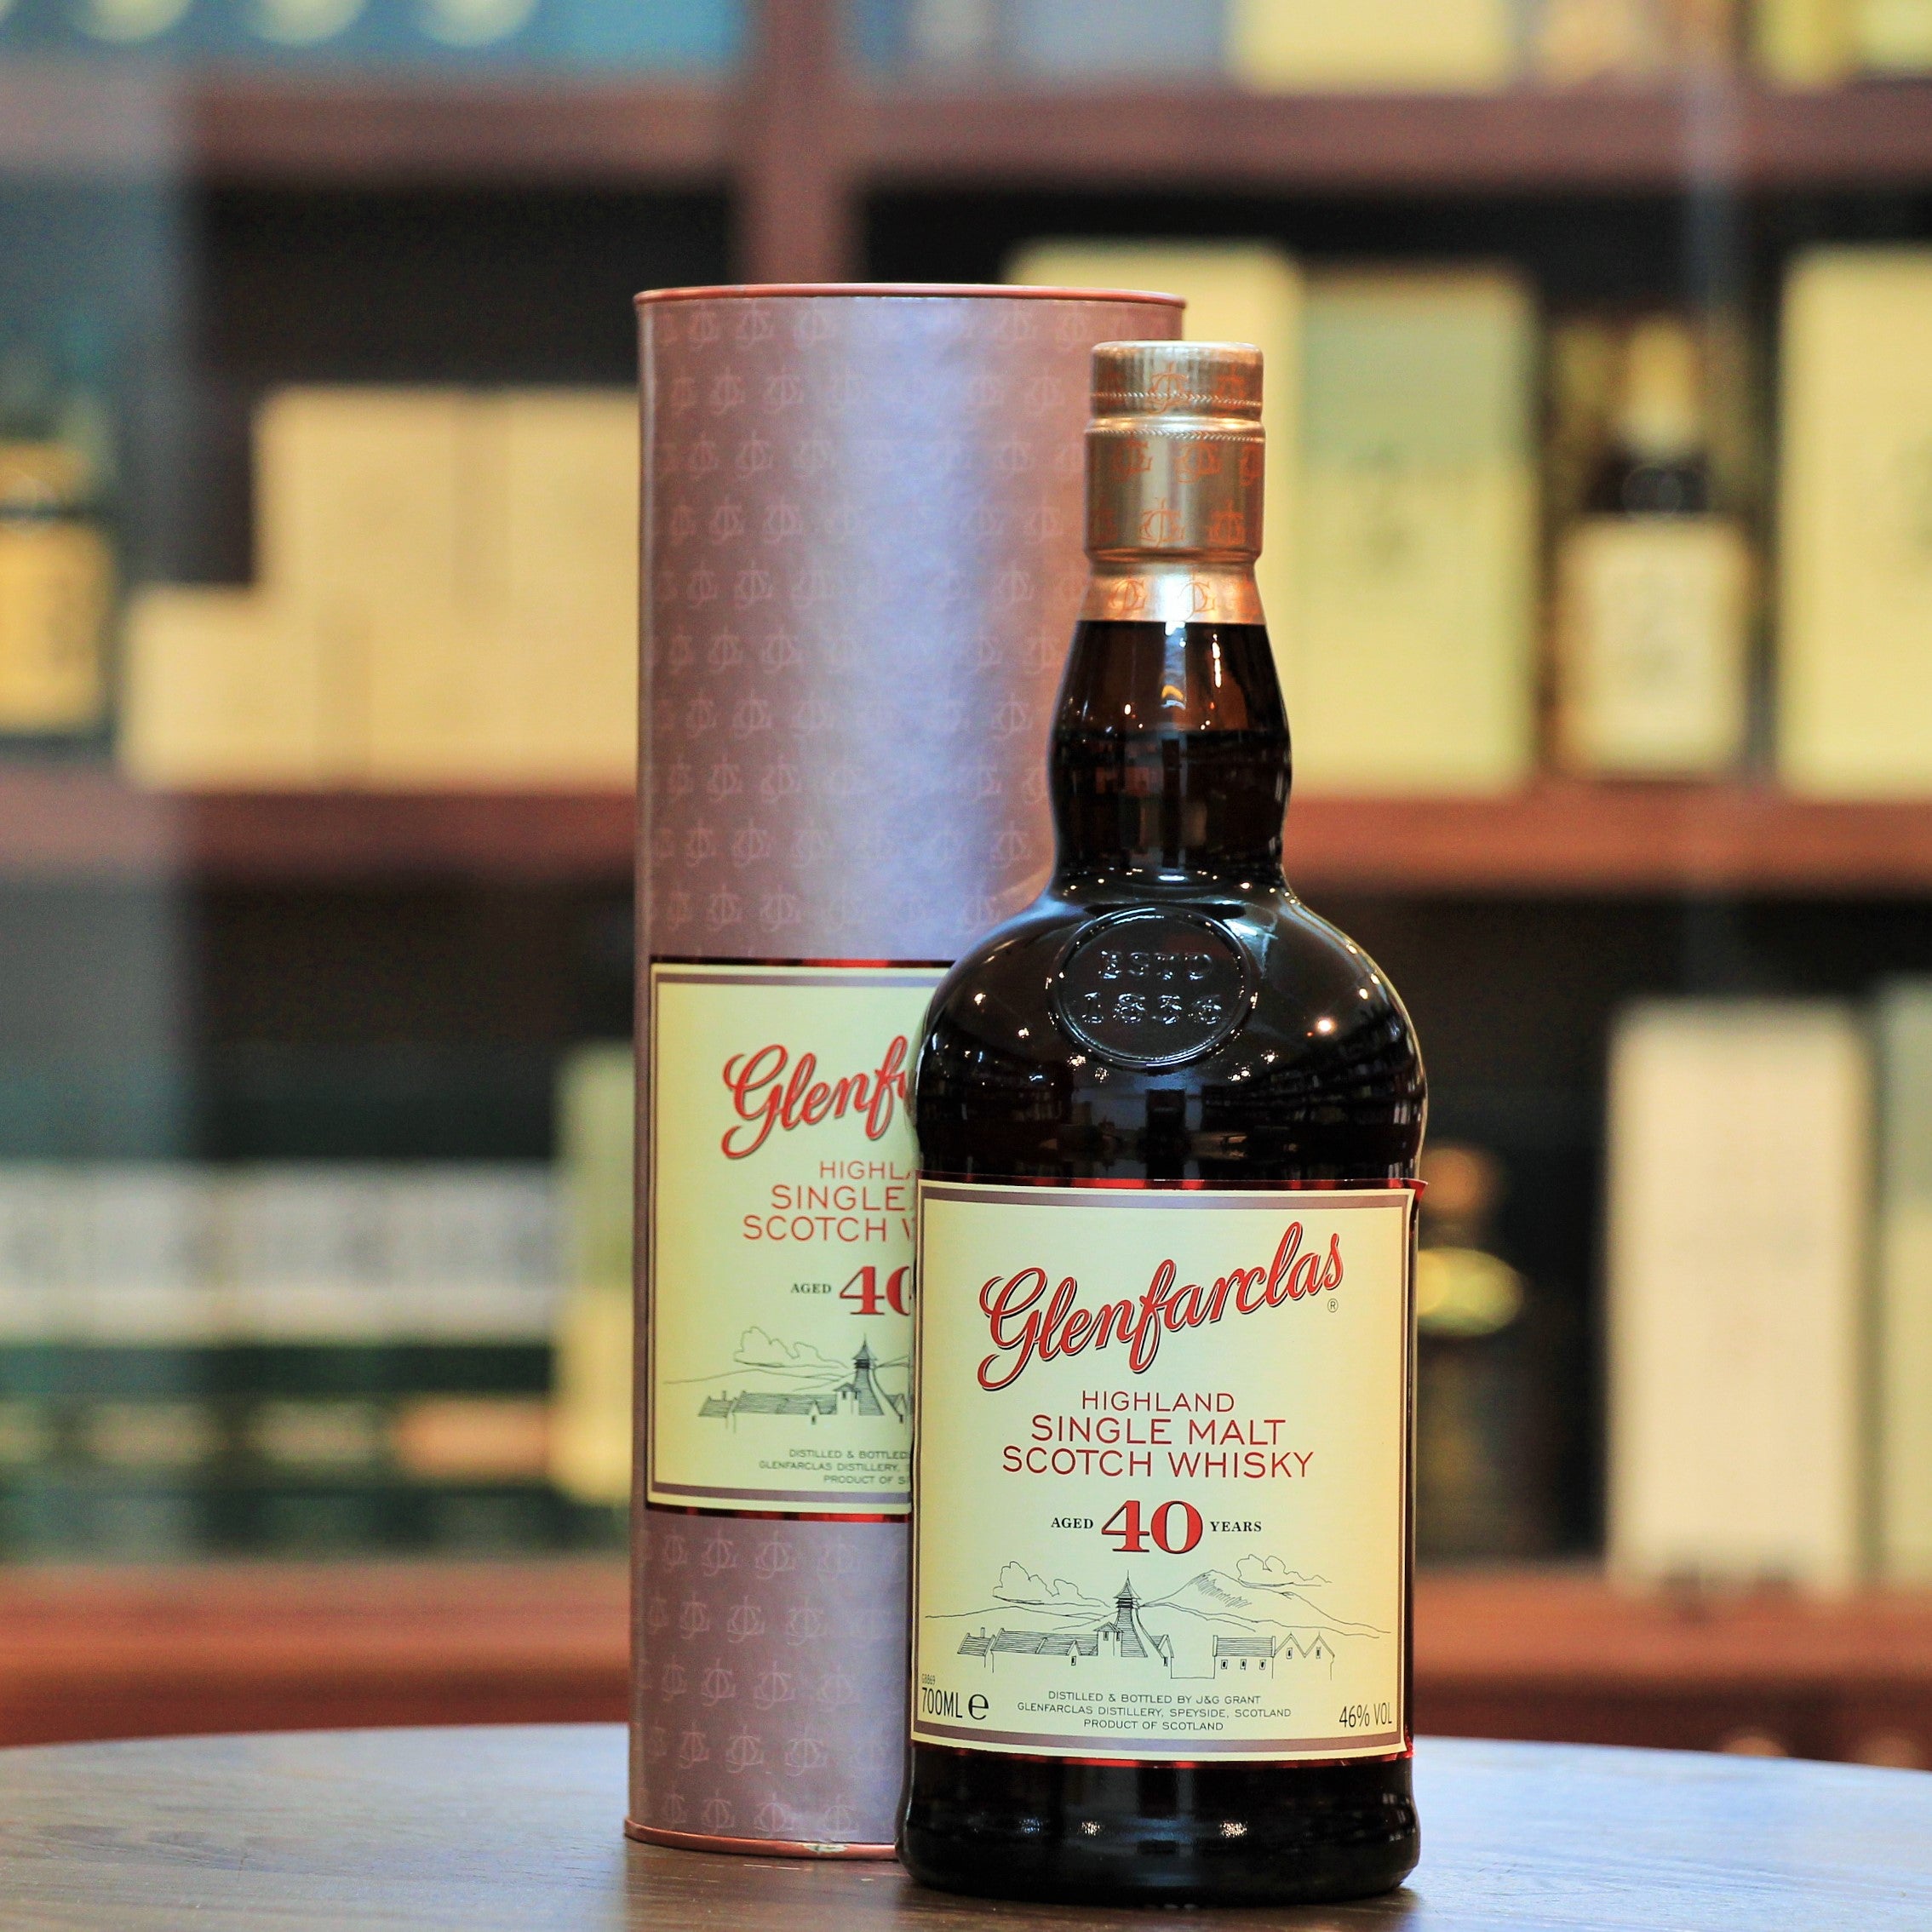 Glenfarclas 40 Years Single Malt Whisky, Different than the "Warehouse Version", this is an older bottling at a higher ABV of 46% vs 43%. Still rich in fruits and wonderfully aged for 40 years in Sherry Casks. Malt Maniacs Awards 2010 Gold Medal and rated 91 points by Whiskyfun.